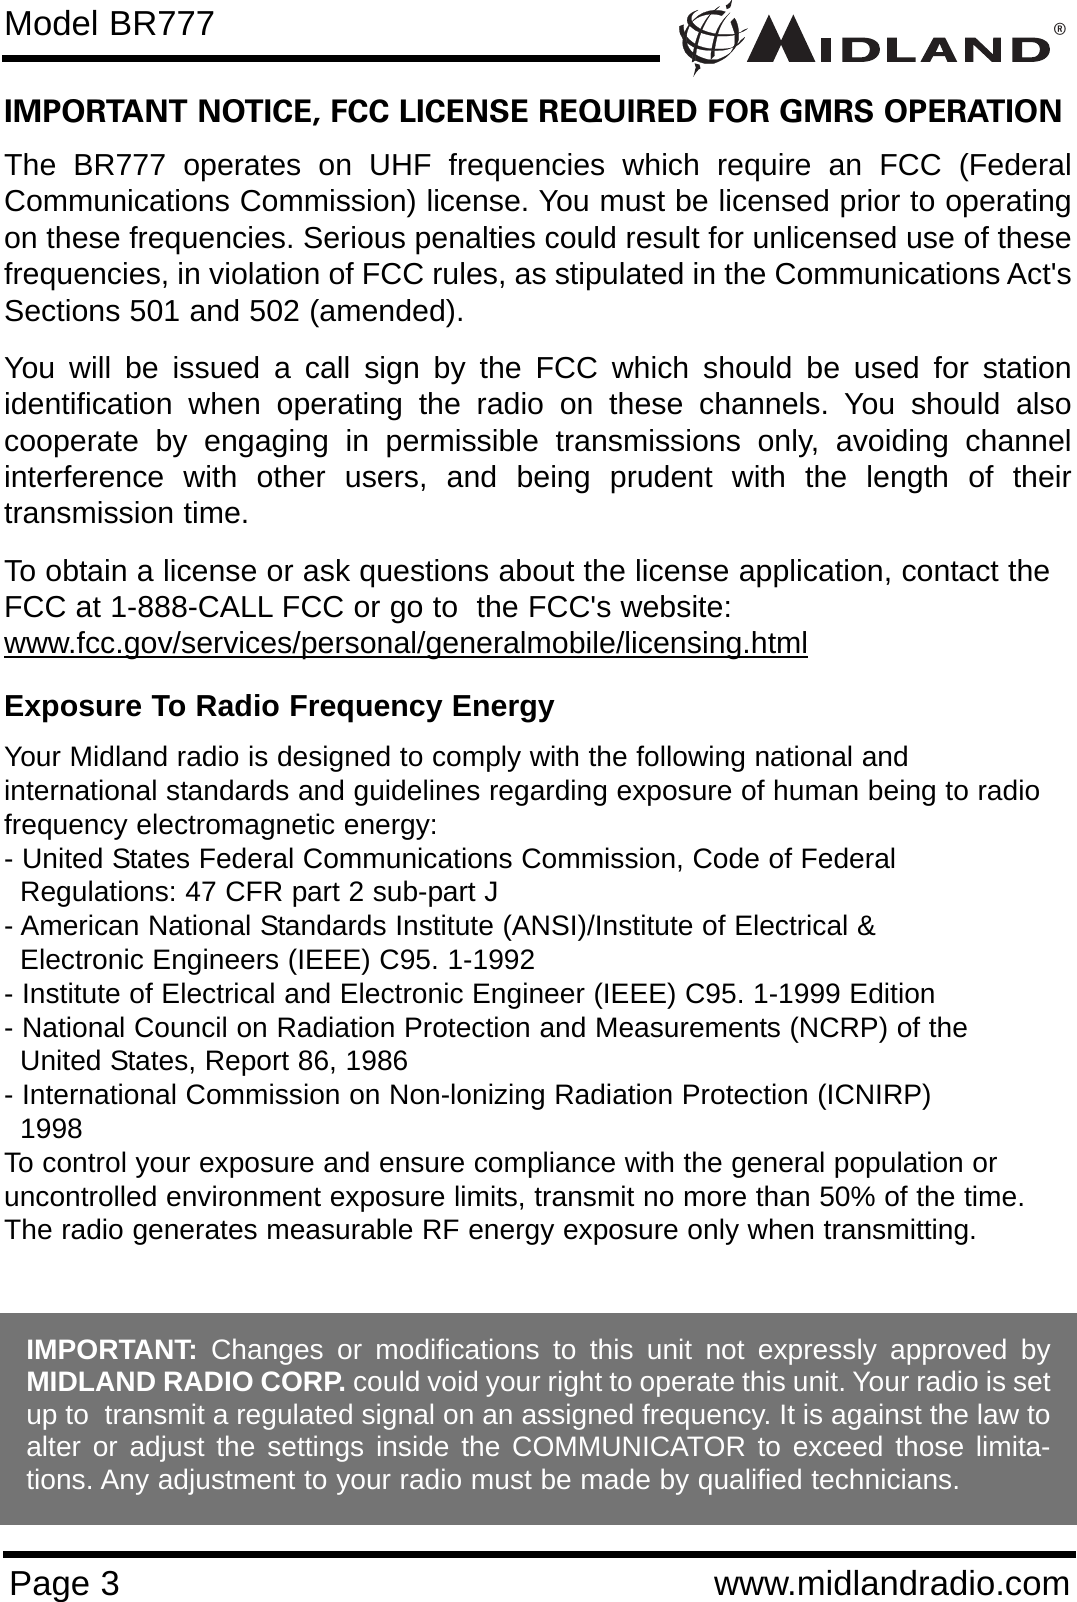 ®Page 3 www.midlandradio.comIMPORTANT NOTICE, FCC LICENSE REQUIRED FOR GMRS OPERATIONThe BR777 operates on UHF frequencies which require an FCC (FederalCommunications Commission) license. You must be licensed prior to operatingon these frequencies. Serious penalties could result for unlicensed use of thesefrequencies, in violation of FCC rules, as stipulated in the Communications Act&apos;sSections 501 and 502 (amended).You will be issued a call sign by the FCC which should be used for stationidentification when operating the radio on these channels. You should alsocooperate by engaging in permissible transmissions only, avoiding channelinterference with other users, and being prudent with the length of theirtransmission time.To obtain a license or ask questions about the license application, contact theFCC at 1-888-CALL FCC or go to  the FCC&apos;s website:www.fcc.gov/services/personal/generalmobile/licensing.htmlExposure To Radio Frequency EnergyYour Midland radio is designed to comply with the following national and international standards and guidelines regarding exposure of human being to radiofrequency electromagnetic energy:- United States Federal Communications Commission, Code of Federal Regulations: 47 CFR part 2 sub-part J- American National Standards Institute (ANSI)/Institute of Electrical &amp; Electronic Engineers (IEEE) C95. 1-1992- Institute of Electrical and Electronic Engineer (IEEE) C95. 1-1999 Edition- National Council on Radiation Protection and Measurements (NCRP) of the United States, Report 86, 1986- International Commission on Non-lonizing Radiation Protection (ICNIRP) 1998To control your exposure and ensure compliance with the general population oruncontrolled environment exposure limits, transmit no more than 50% of the time.The radio generates measurable RF energy exposure only when transmitting.Model BR777IMPORTANT: Changes or modifications to this unit not expressly approved byMIDLAND RADIO CORP. could void your right to operate this unit. Your radio is setup to  transmit a regulated signal on an assigned frequency. It is against the law toalter or adjust the settings inside the COMMUNICATOR to exceed those limita-tions. Any adjustment to your radio must be made by qualified technicians.